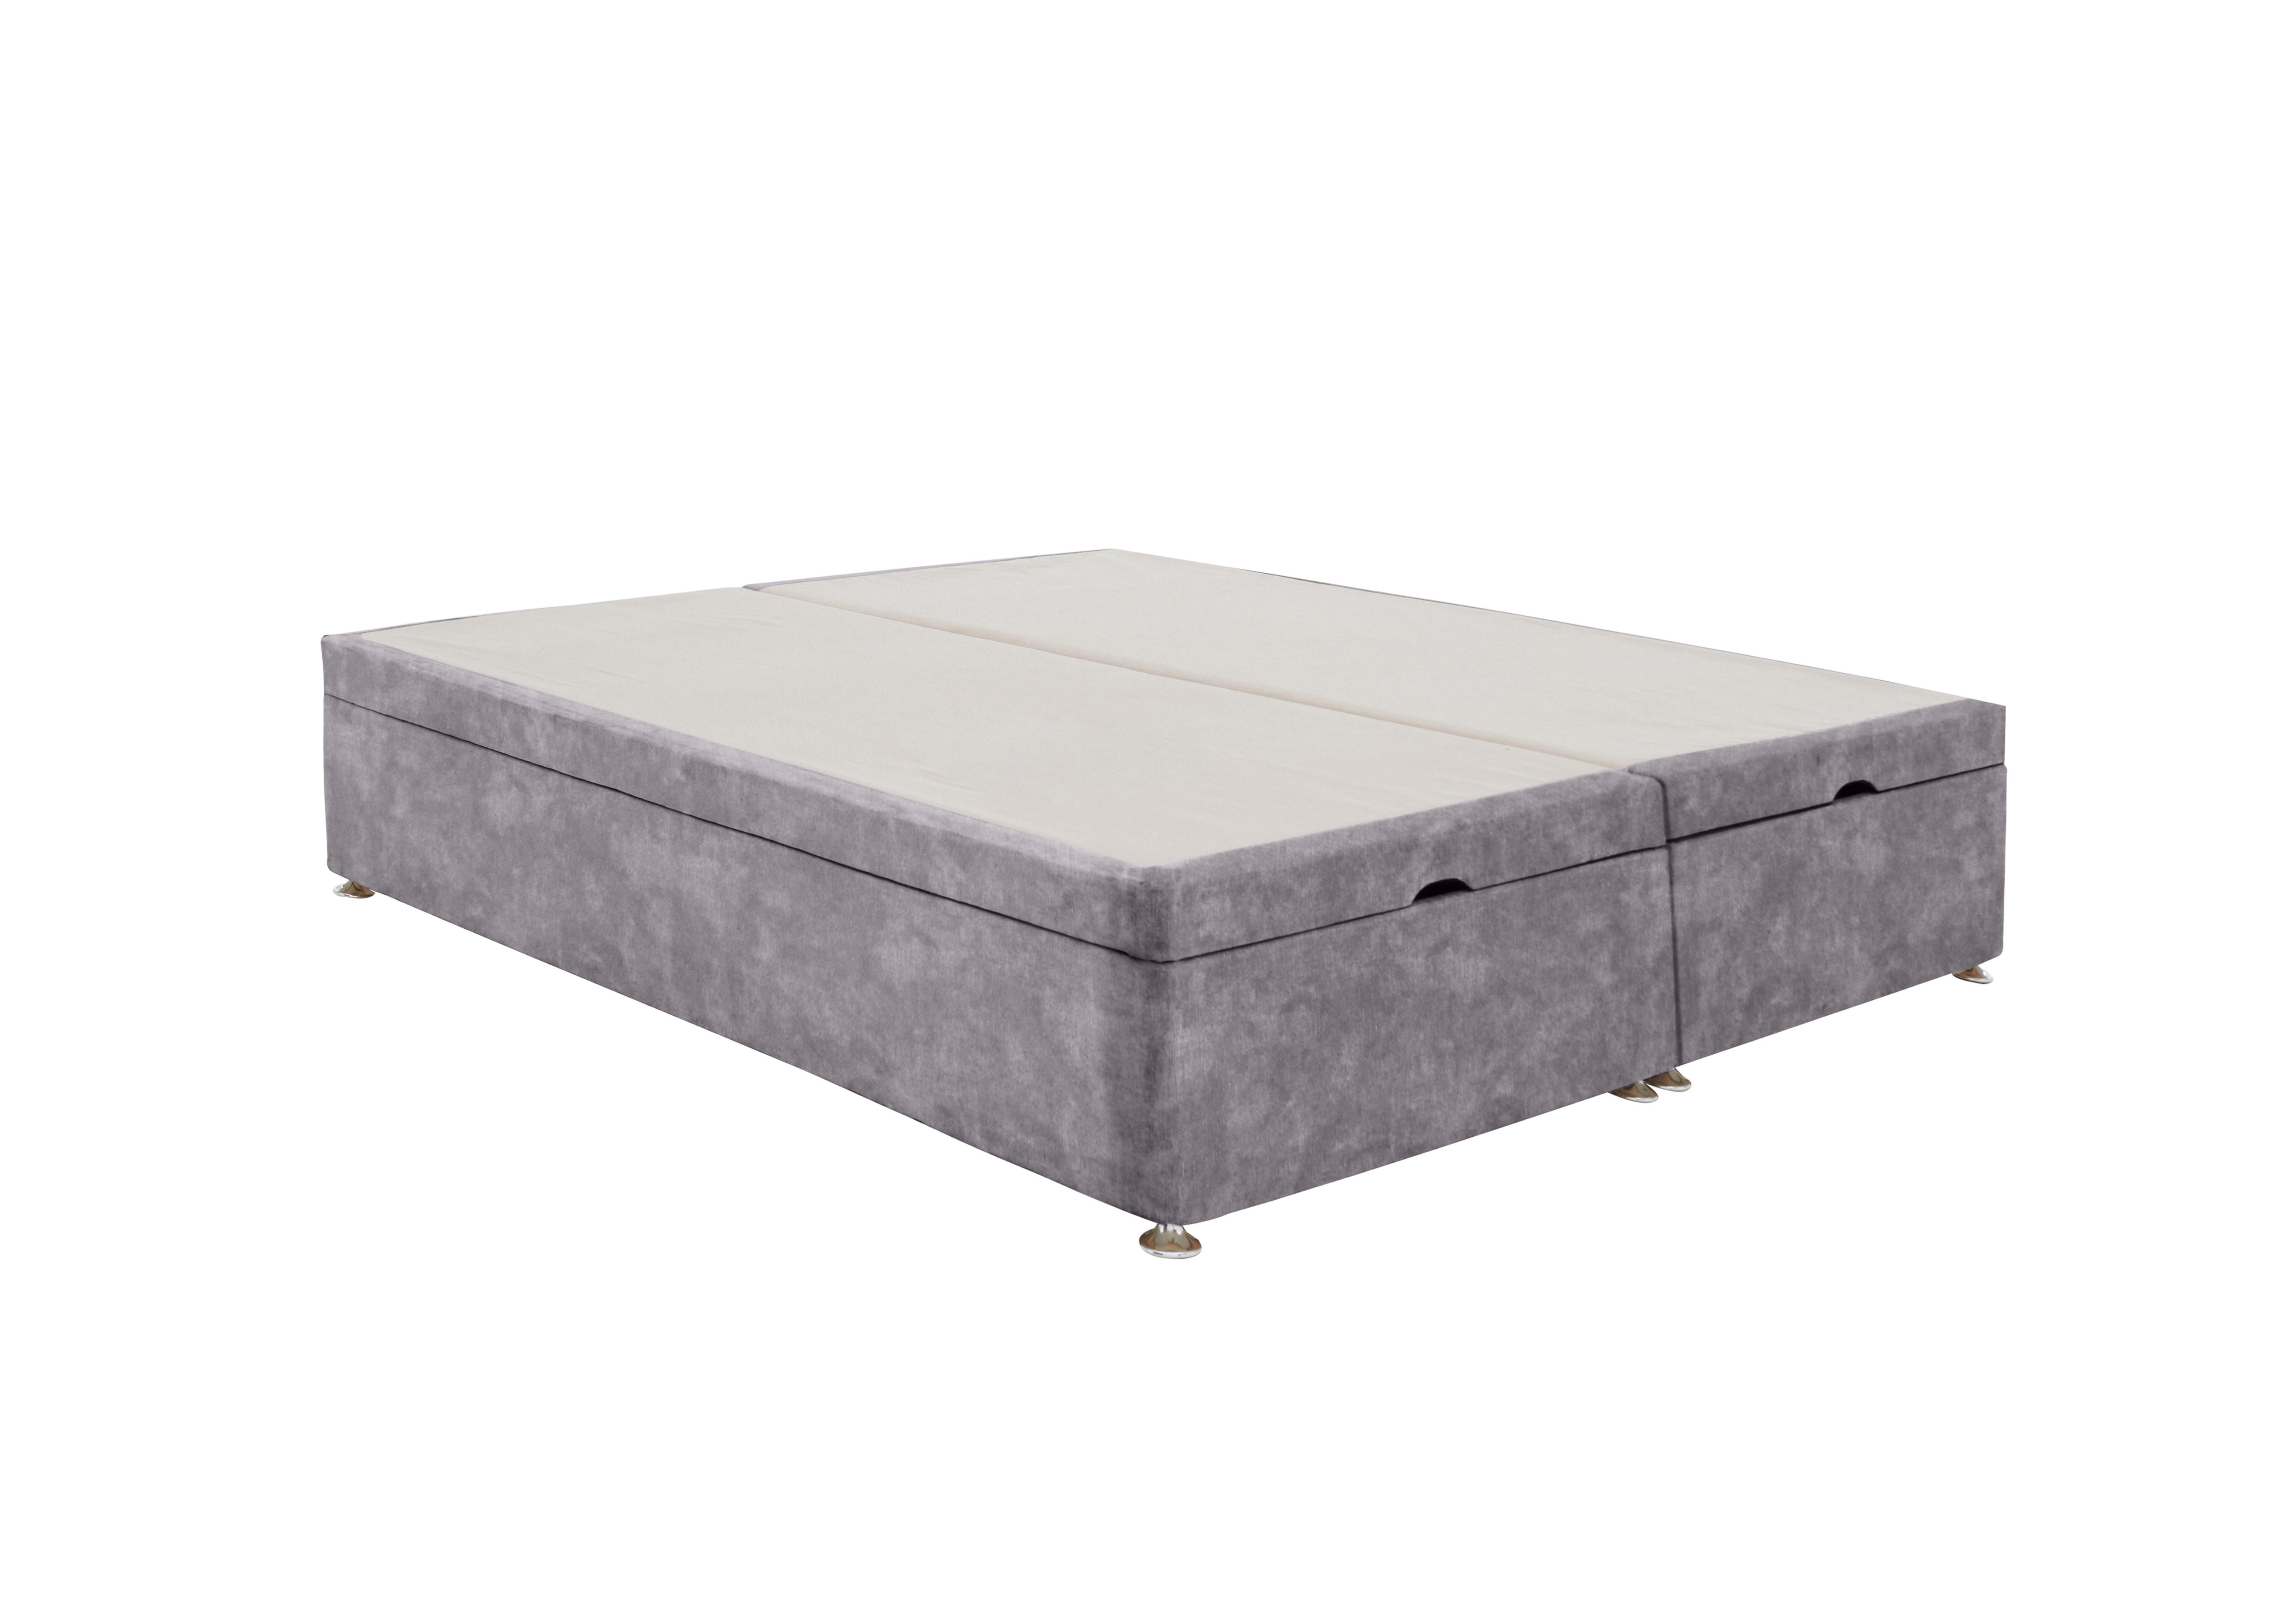 End-lift Ottoman Divan Base in Lace Dolphin on Furniture Village